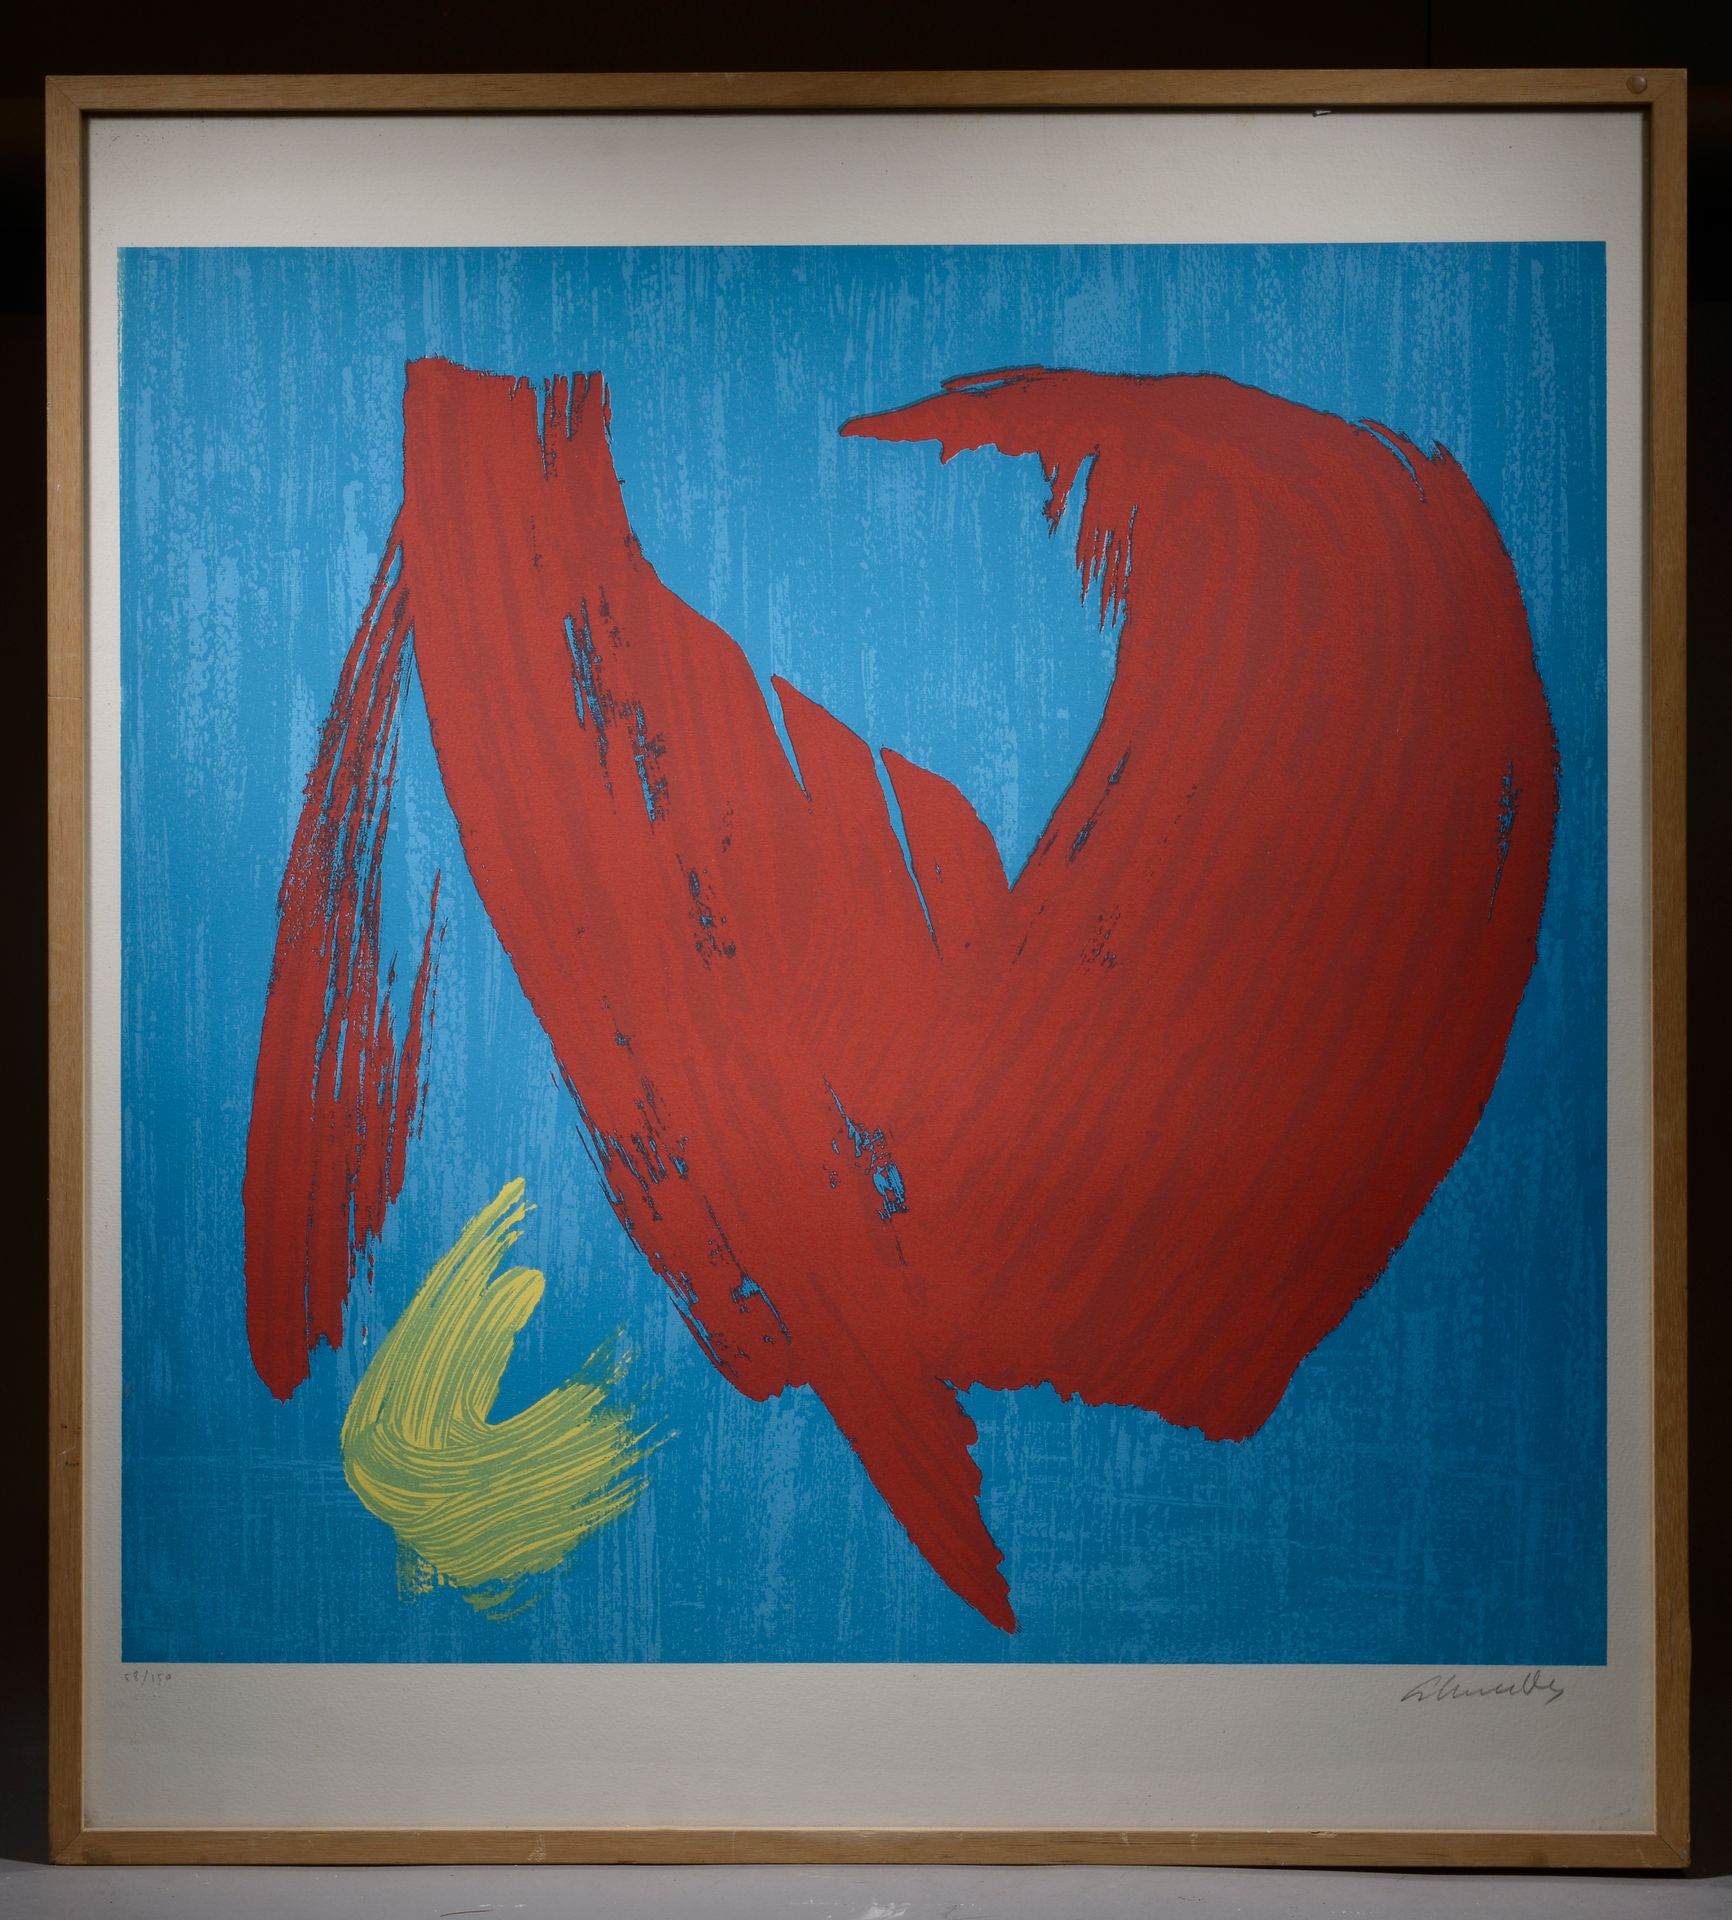 Null Gérard SCHNEIDER (1896-1986).

Abstraction in red and yellow on blue backgr&hellip;